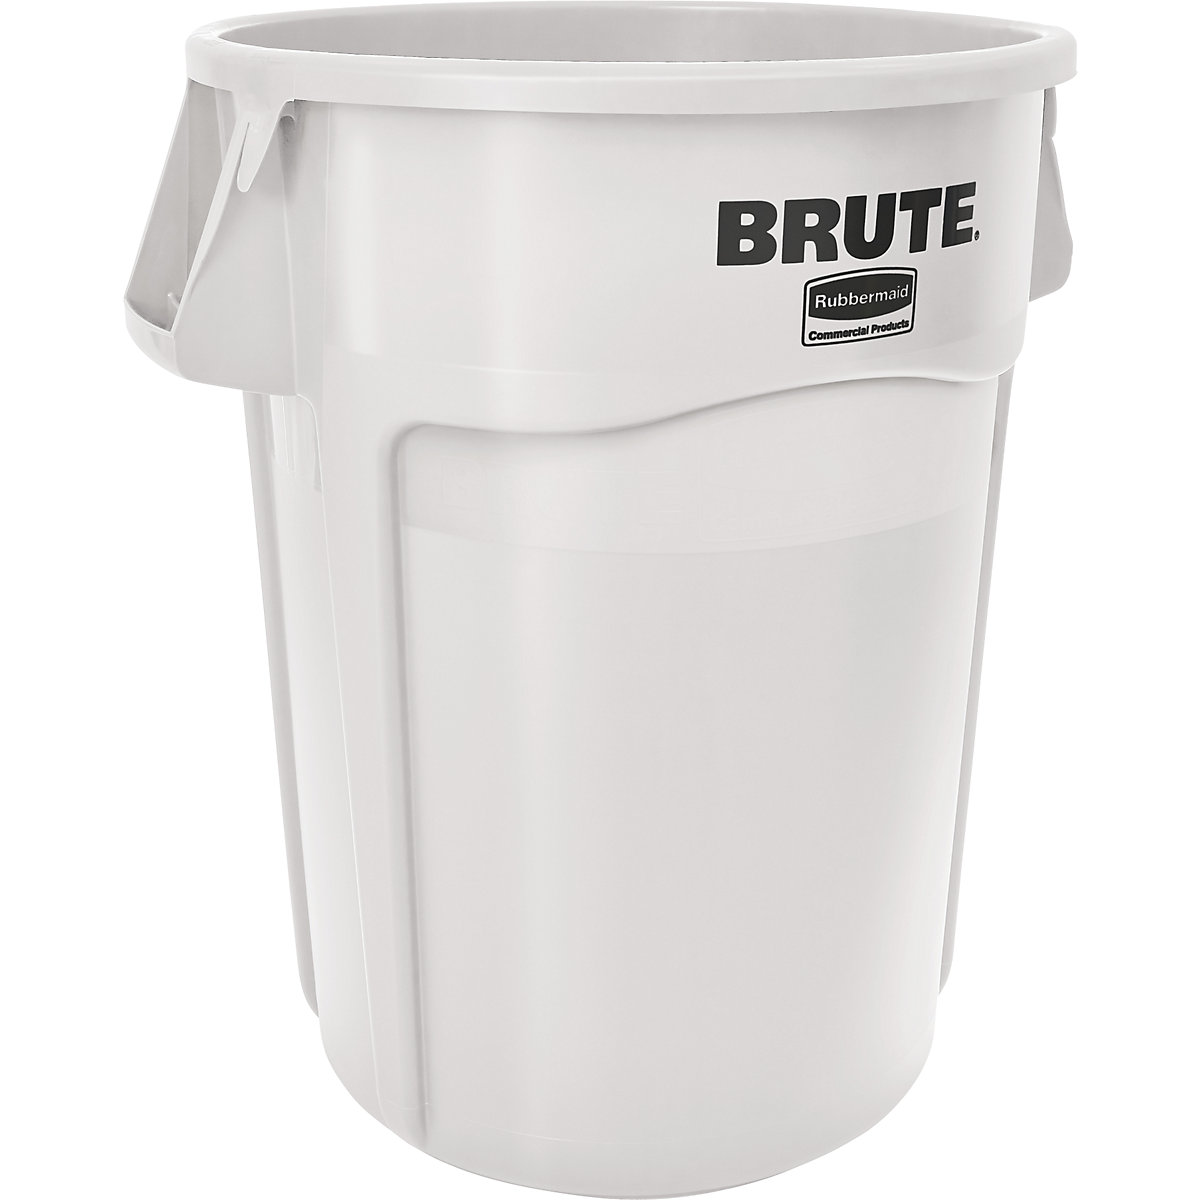 BRUTE® universal container, round – Rubbermaid, capacity 166 l, white-15